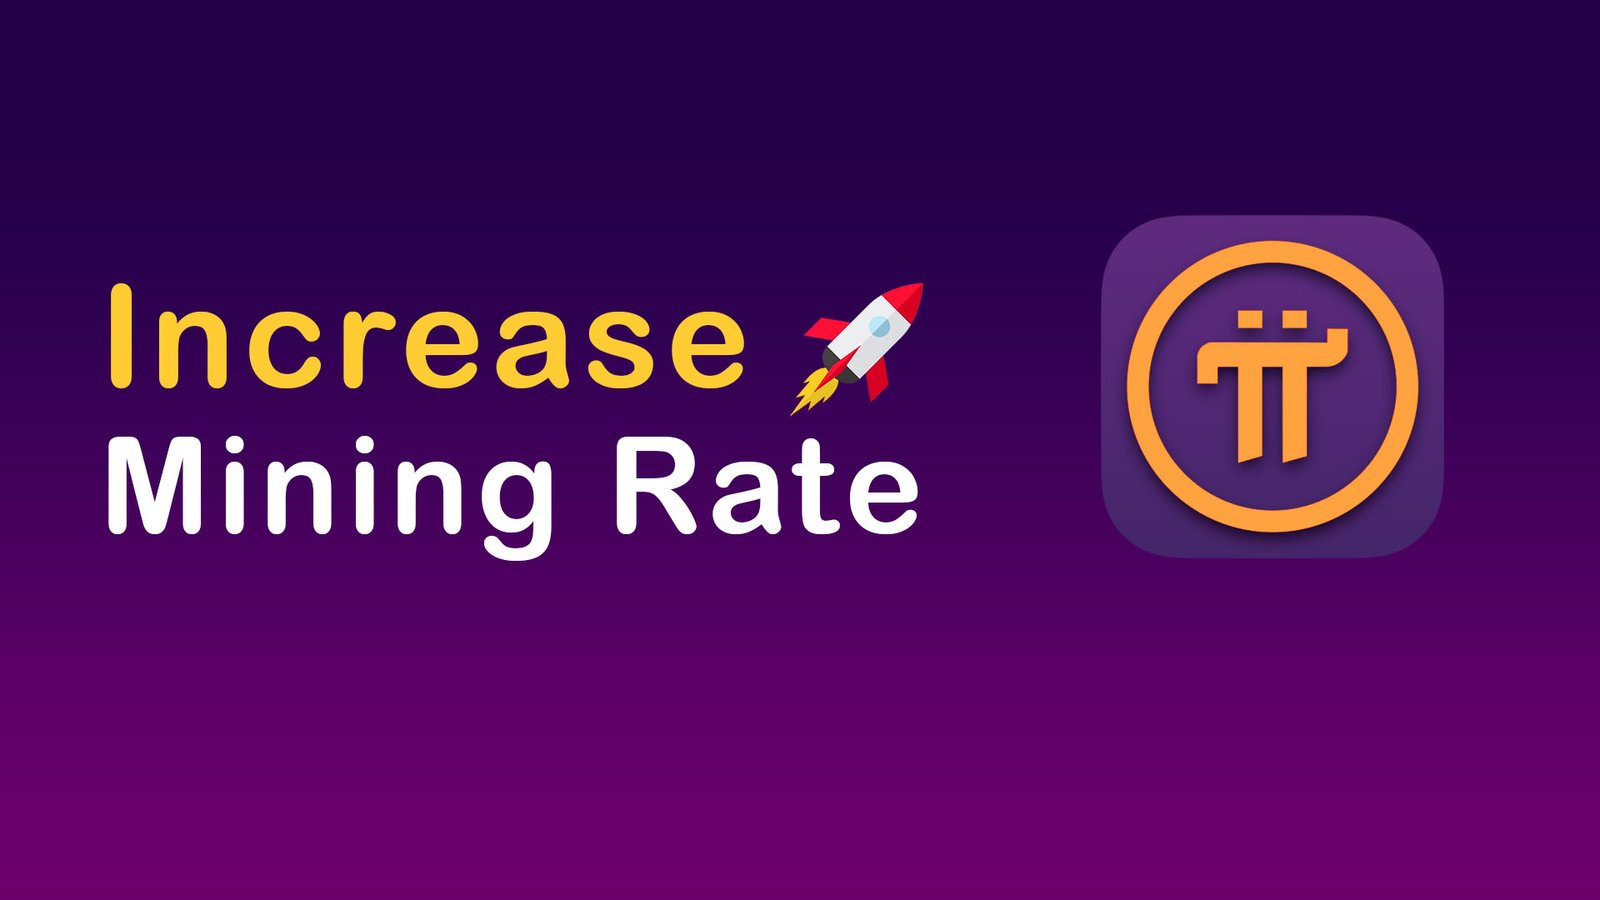 How to increase Pi mining rate